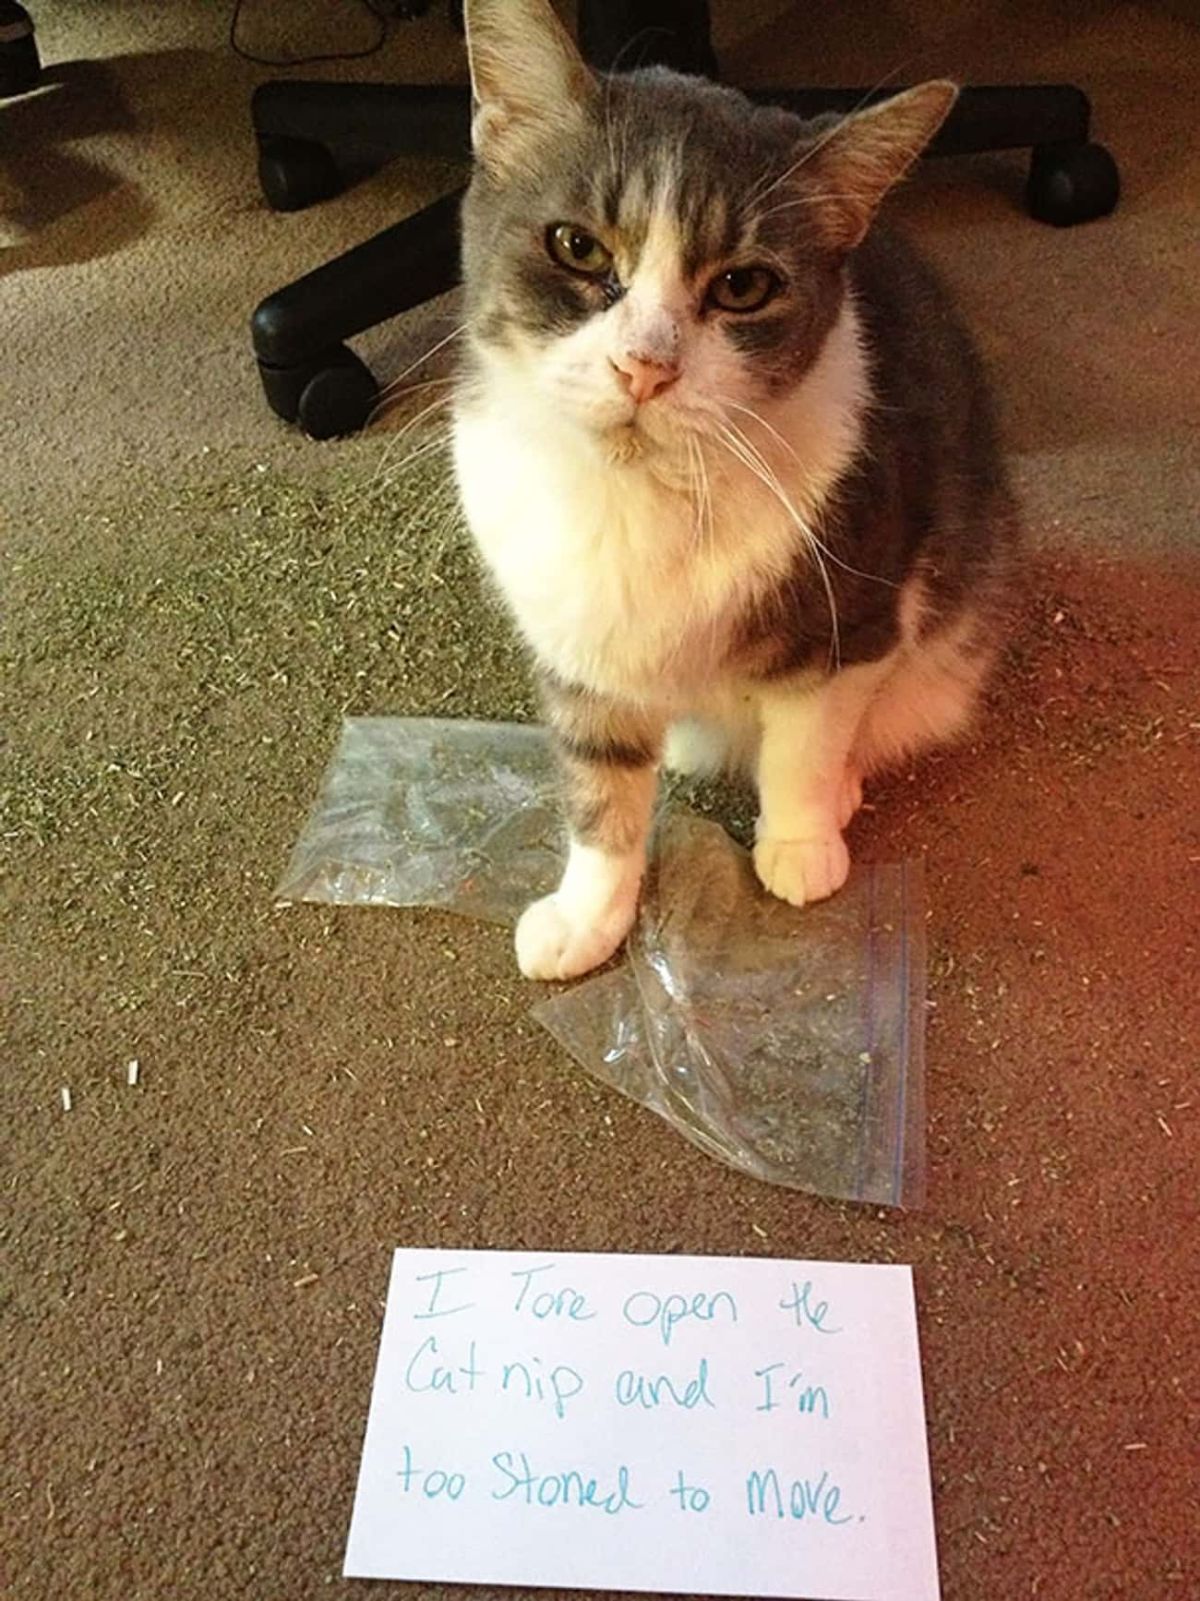 grey and white cat sitting on the floor with lots of catnip and their bags on the floor with a note saying "I tore open the cat nip and I'm too stoned to move"